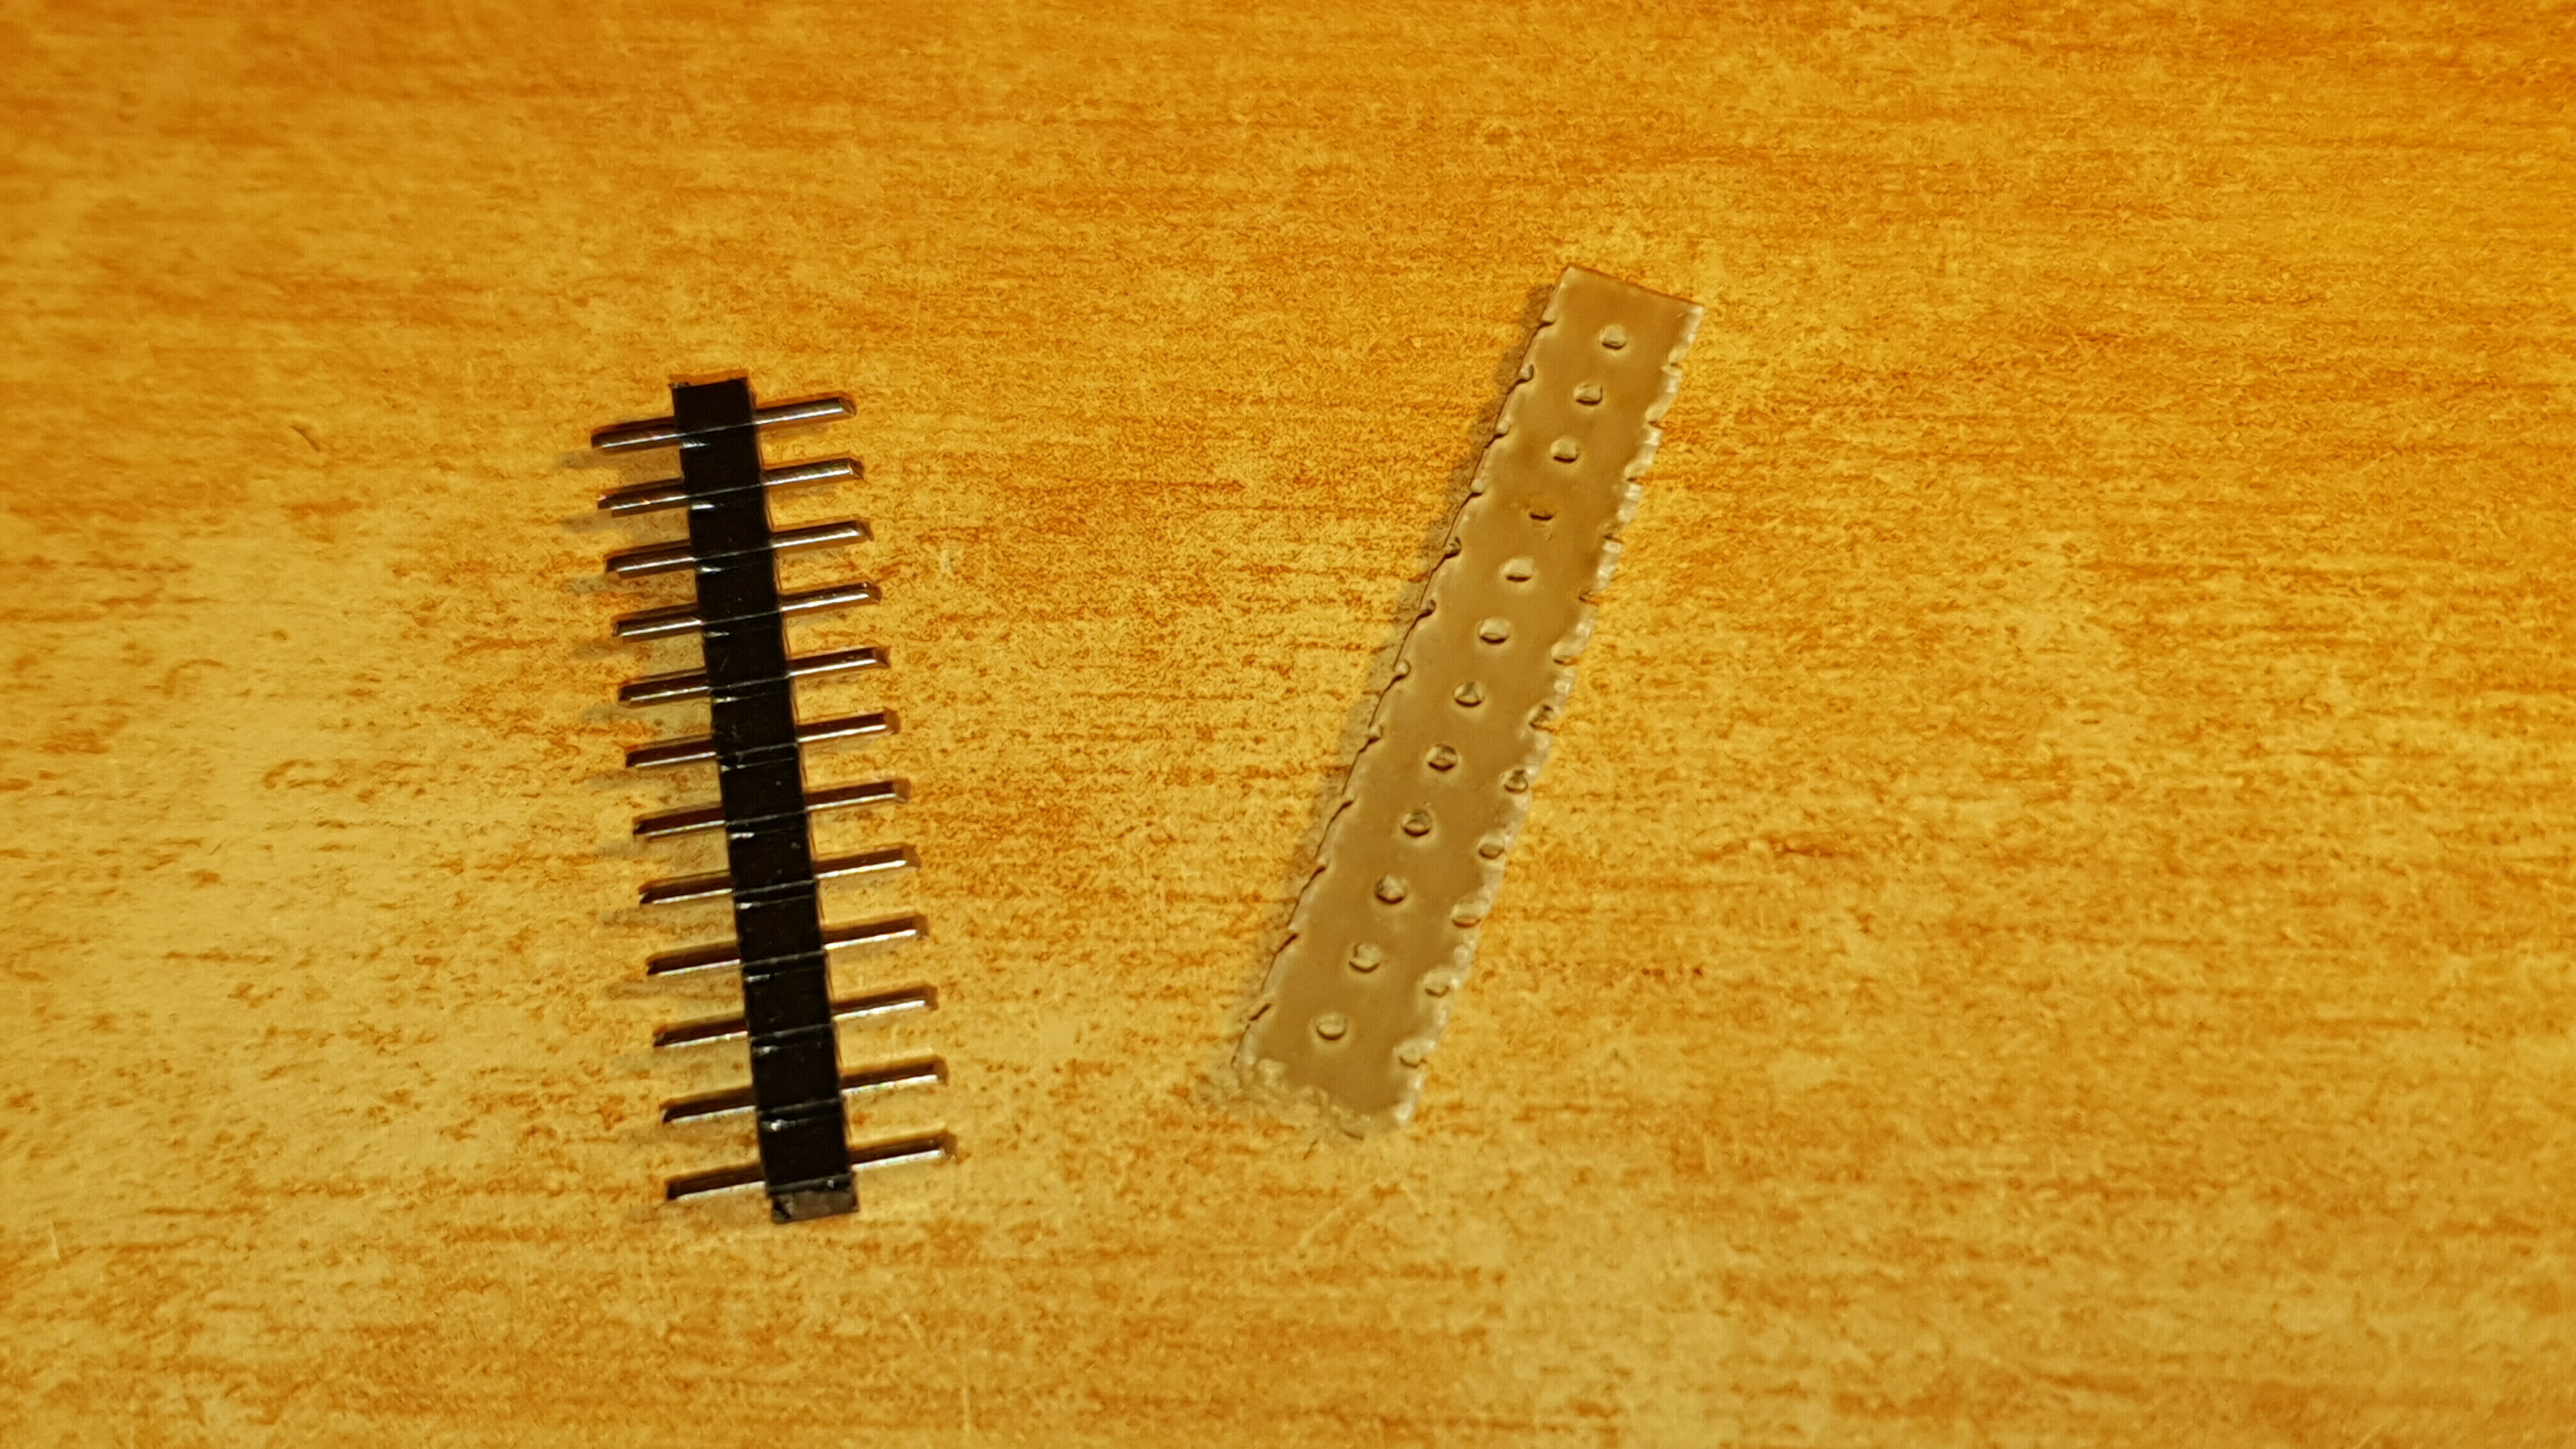 trimmed_pins_after_spacer_removed.jpg